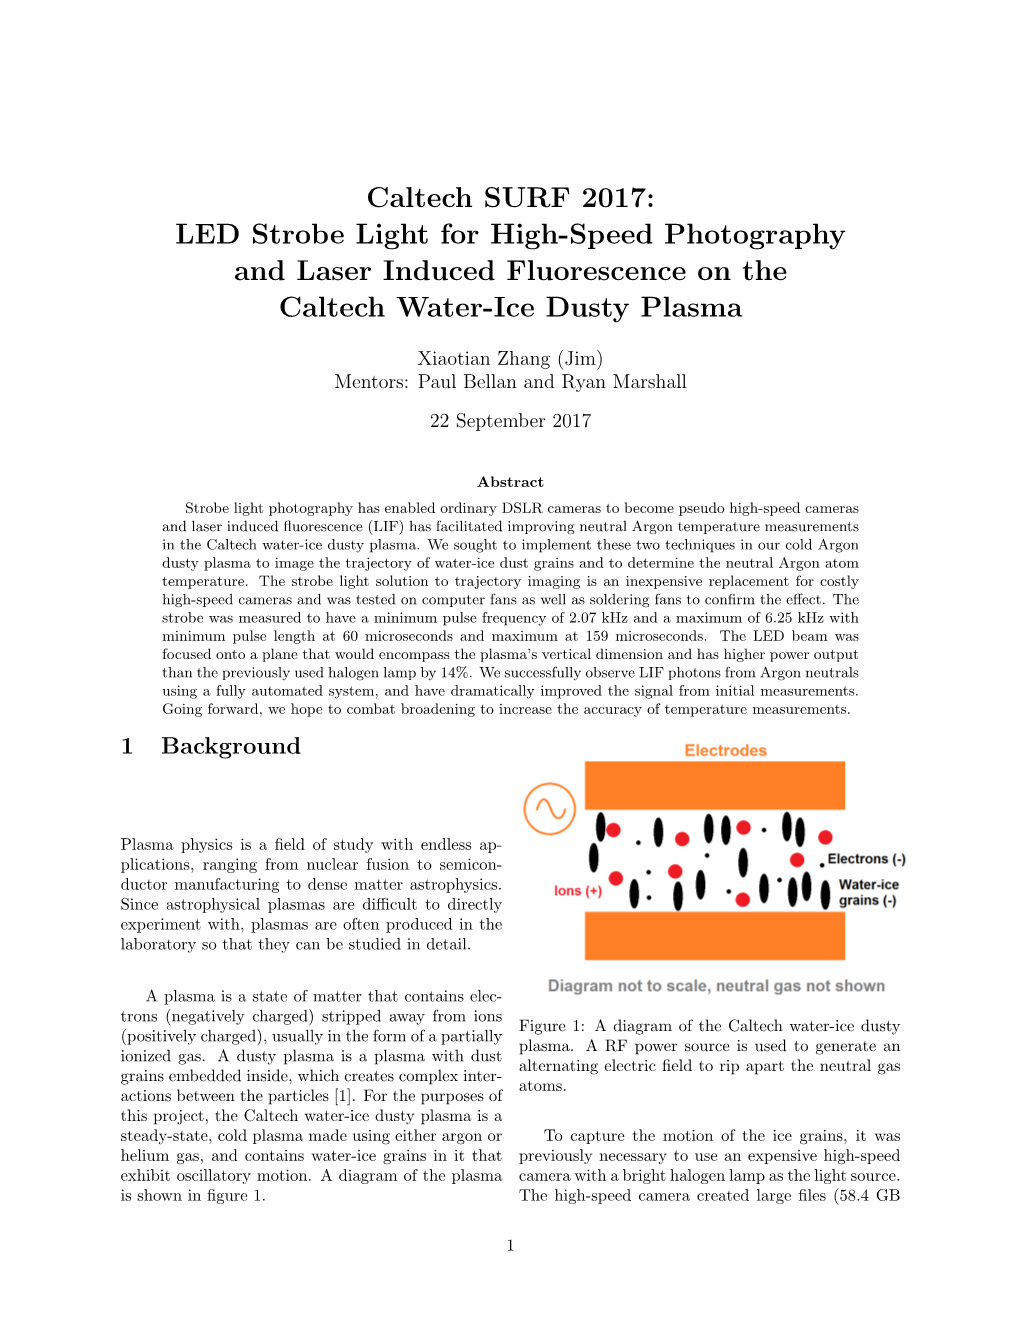 Caltech SURF 2017: LED Strobe Light for High-Speed Photography and Laser Induced Fluorescence on the Caltech Water-Ice Dusty Plasma